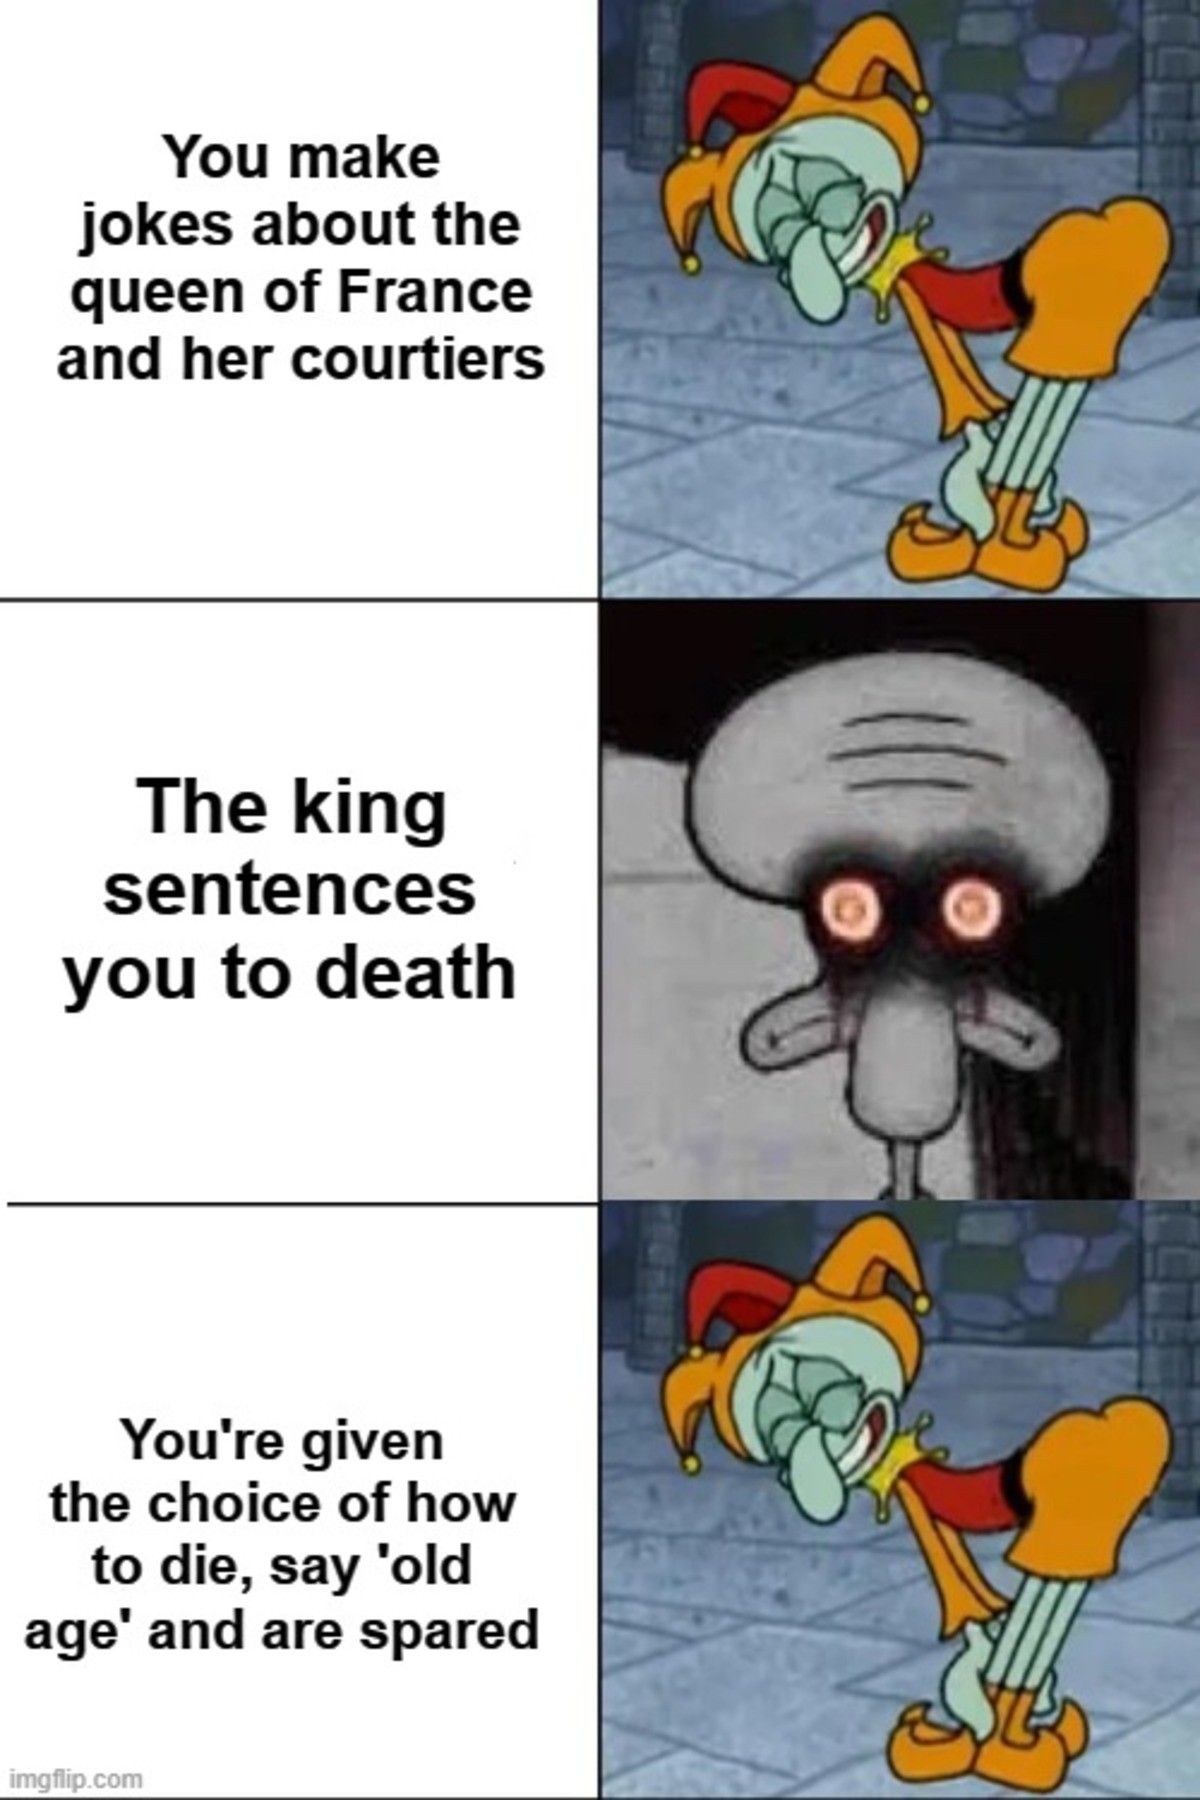 King's reaction in second panel